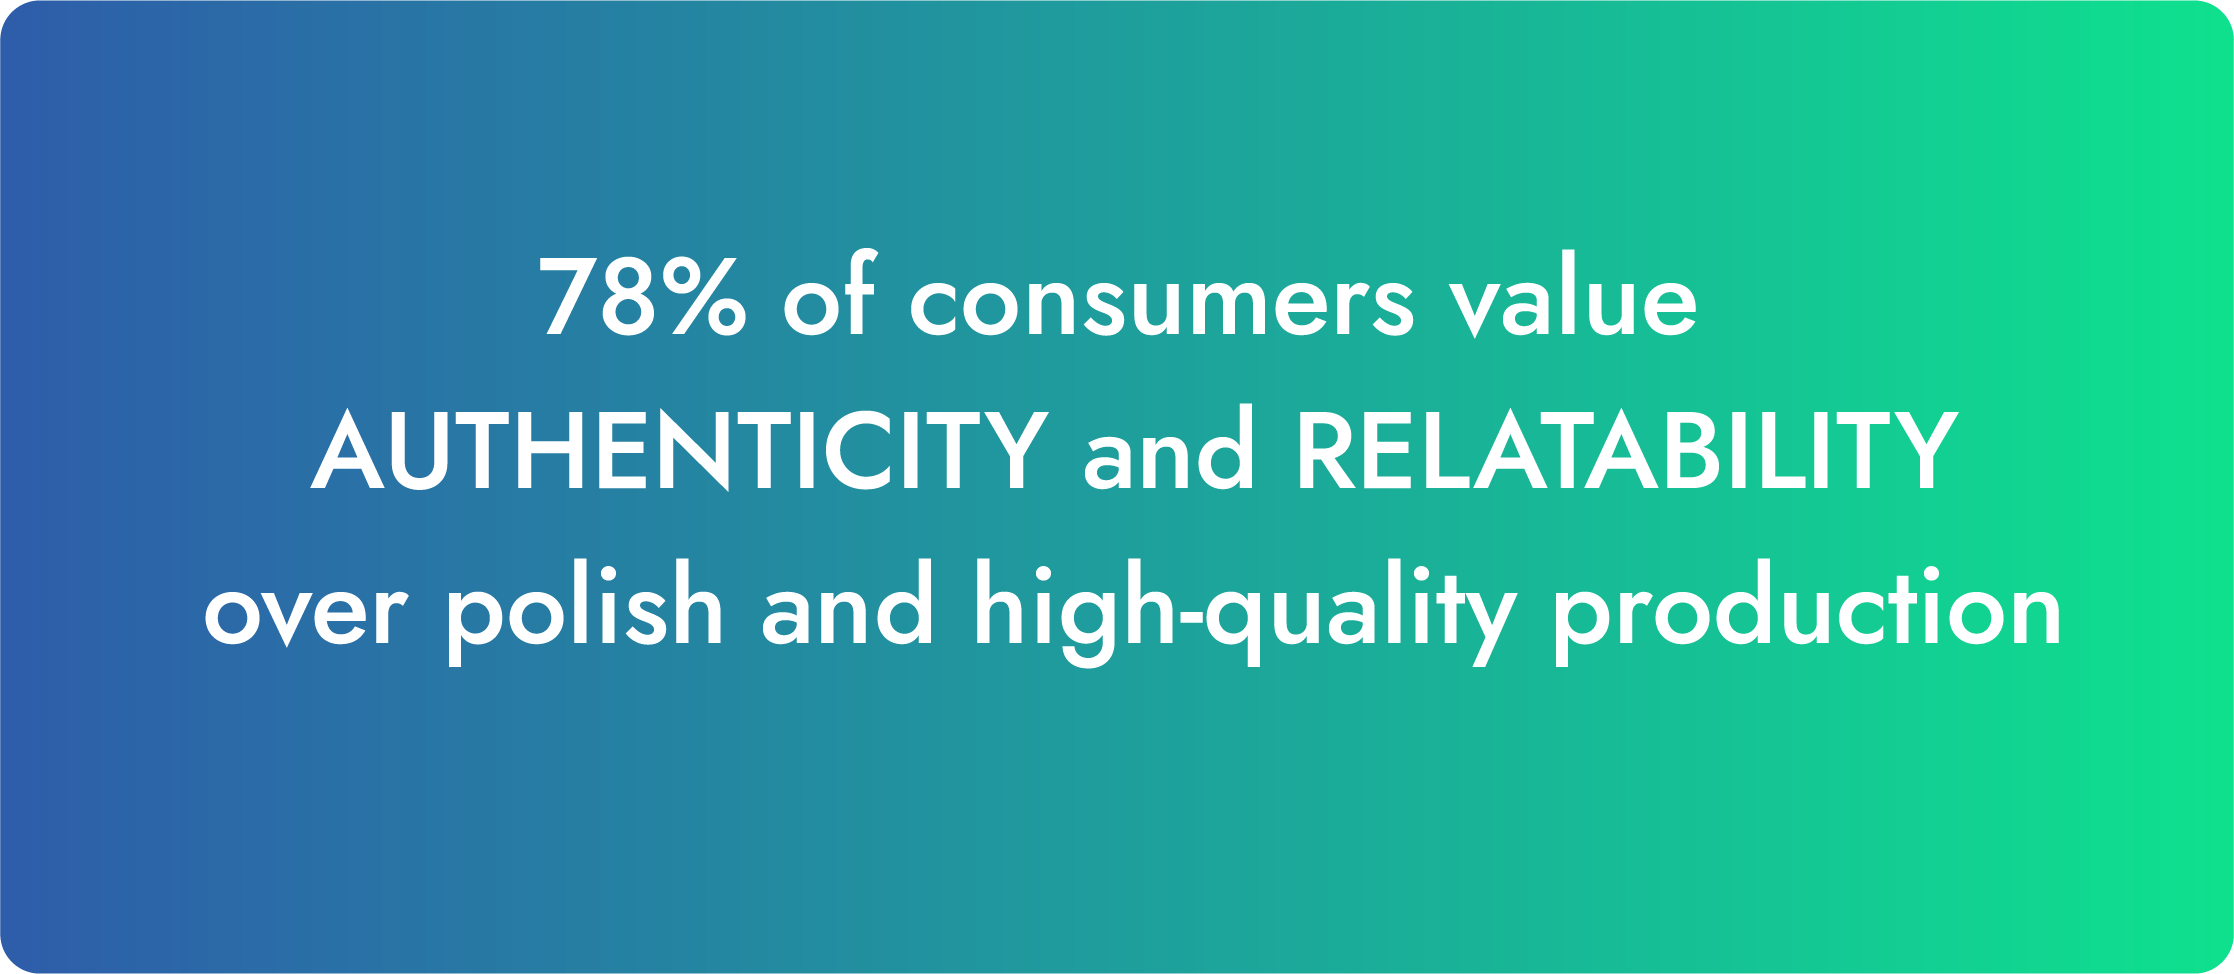 78% of consumers value authenticity and relatability over polish and high-quality production